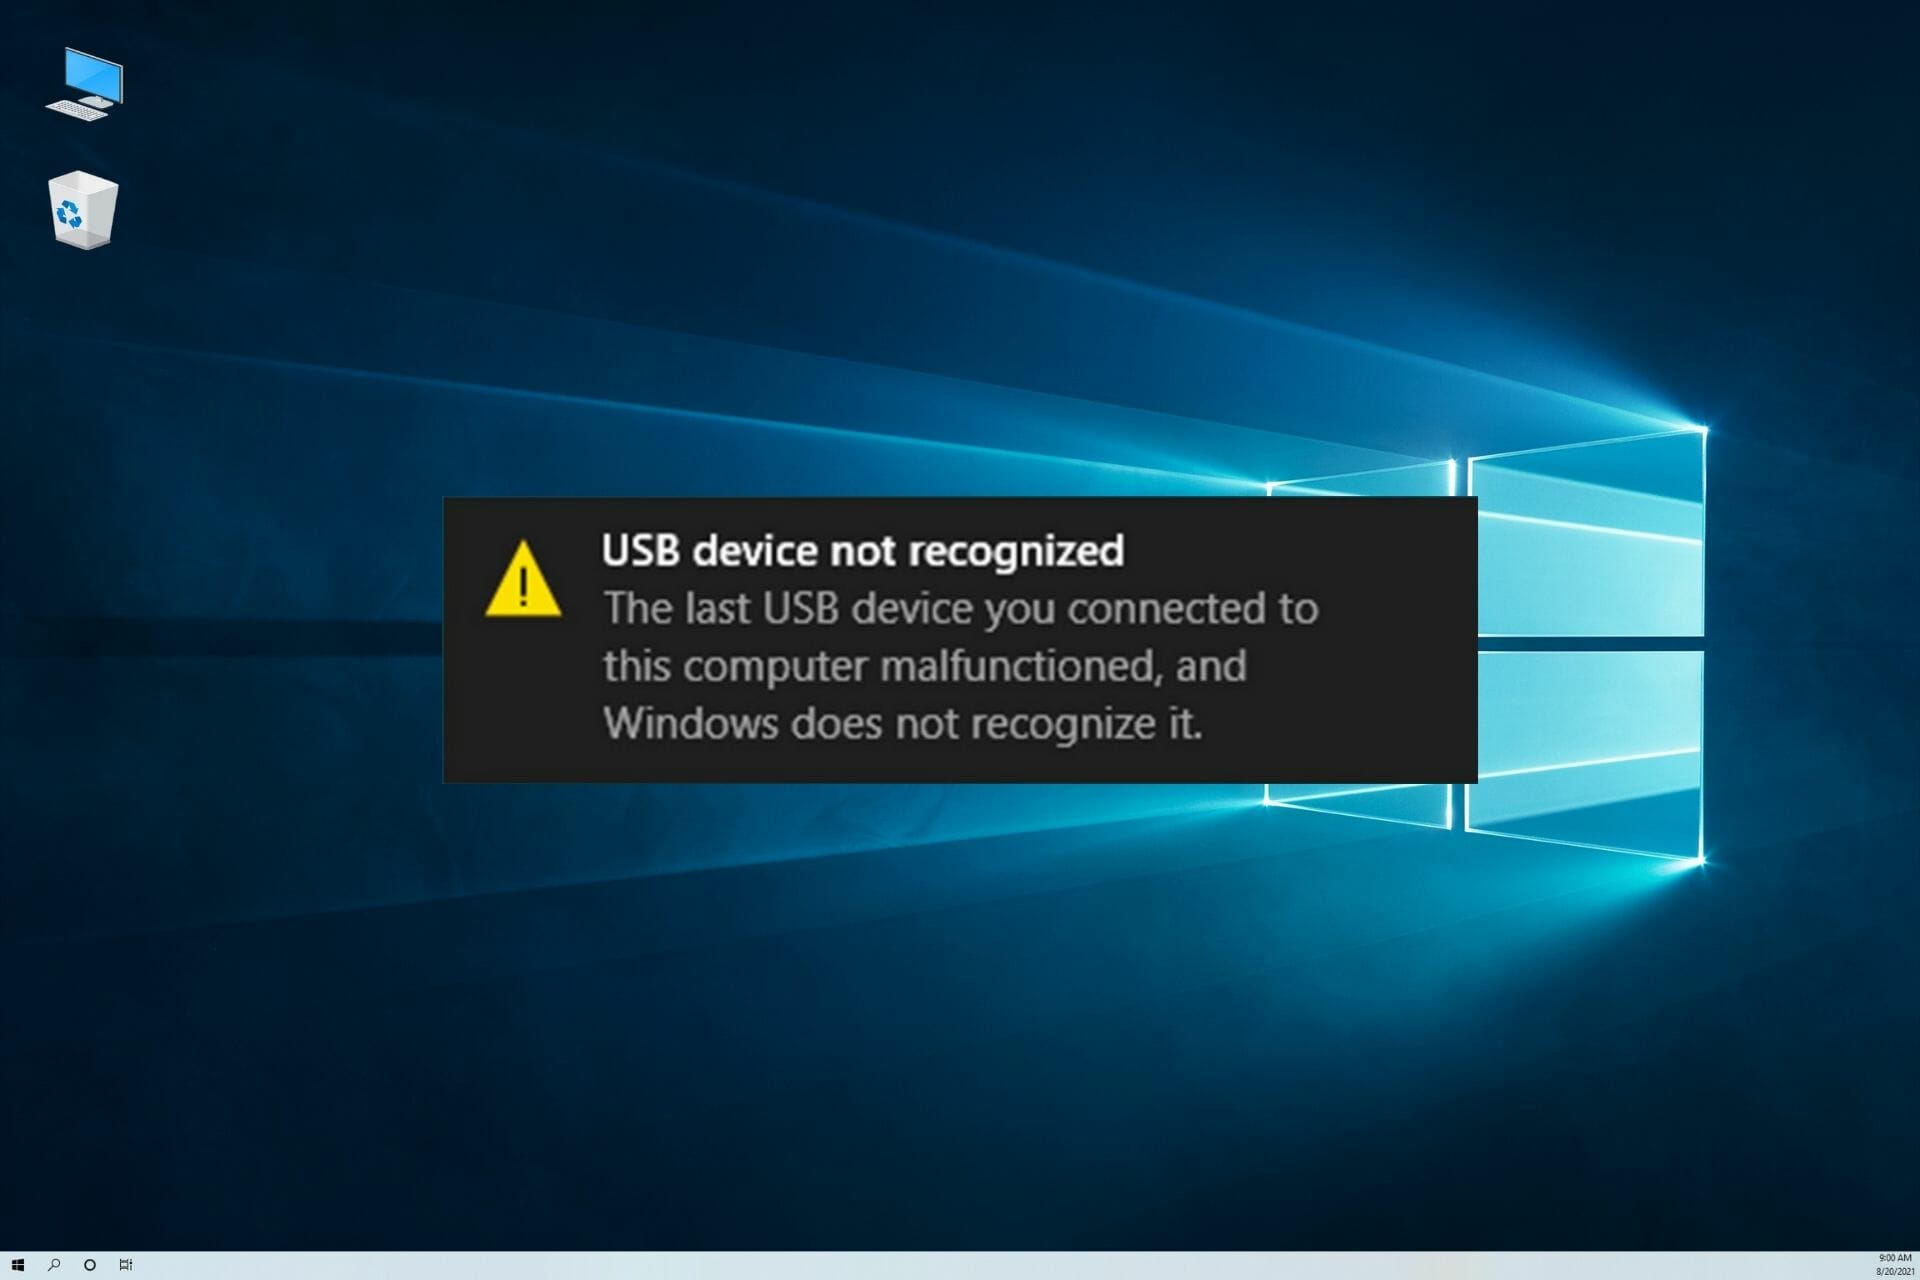 USB device not recognized in Windows 10